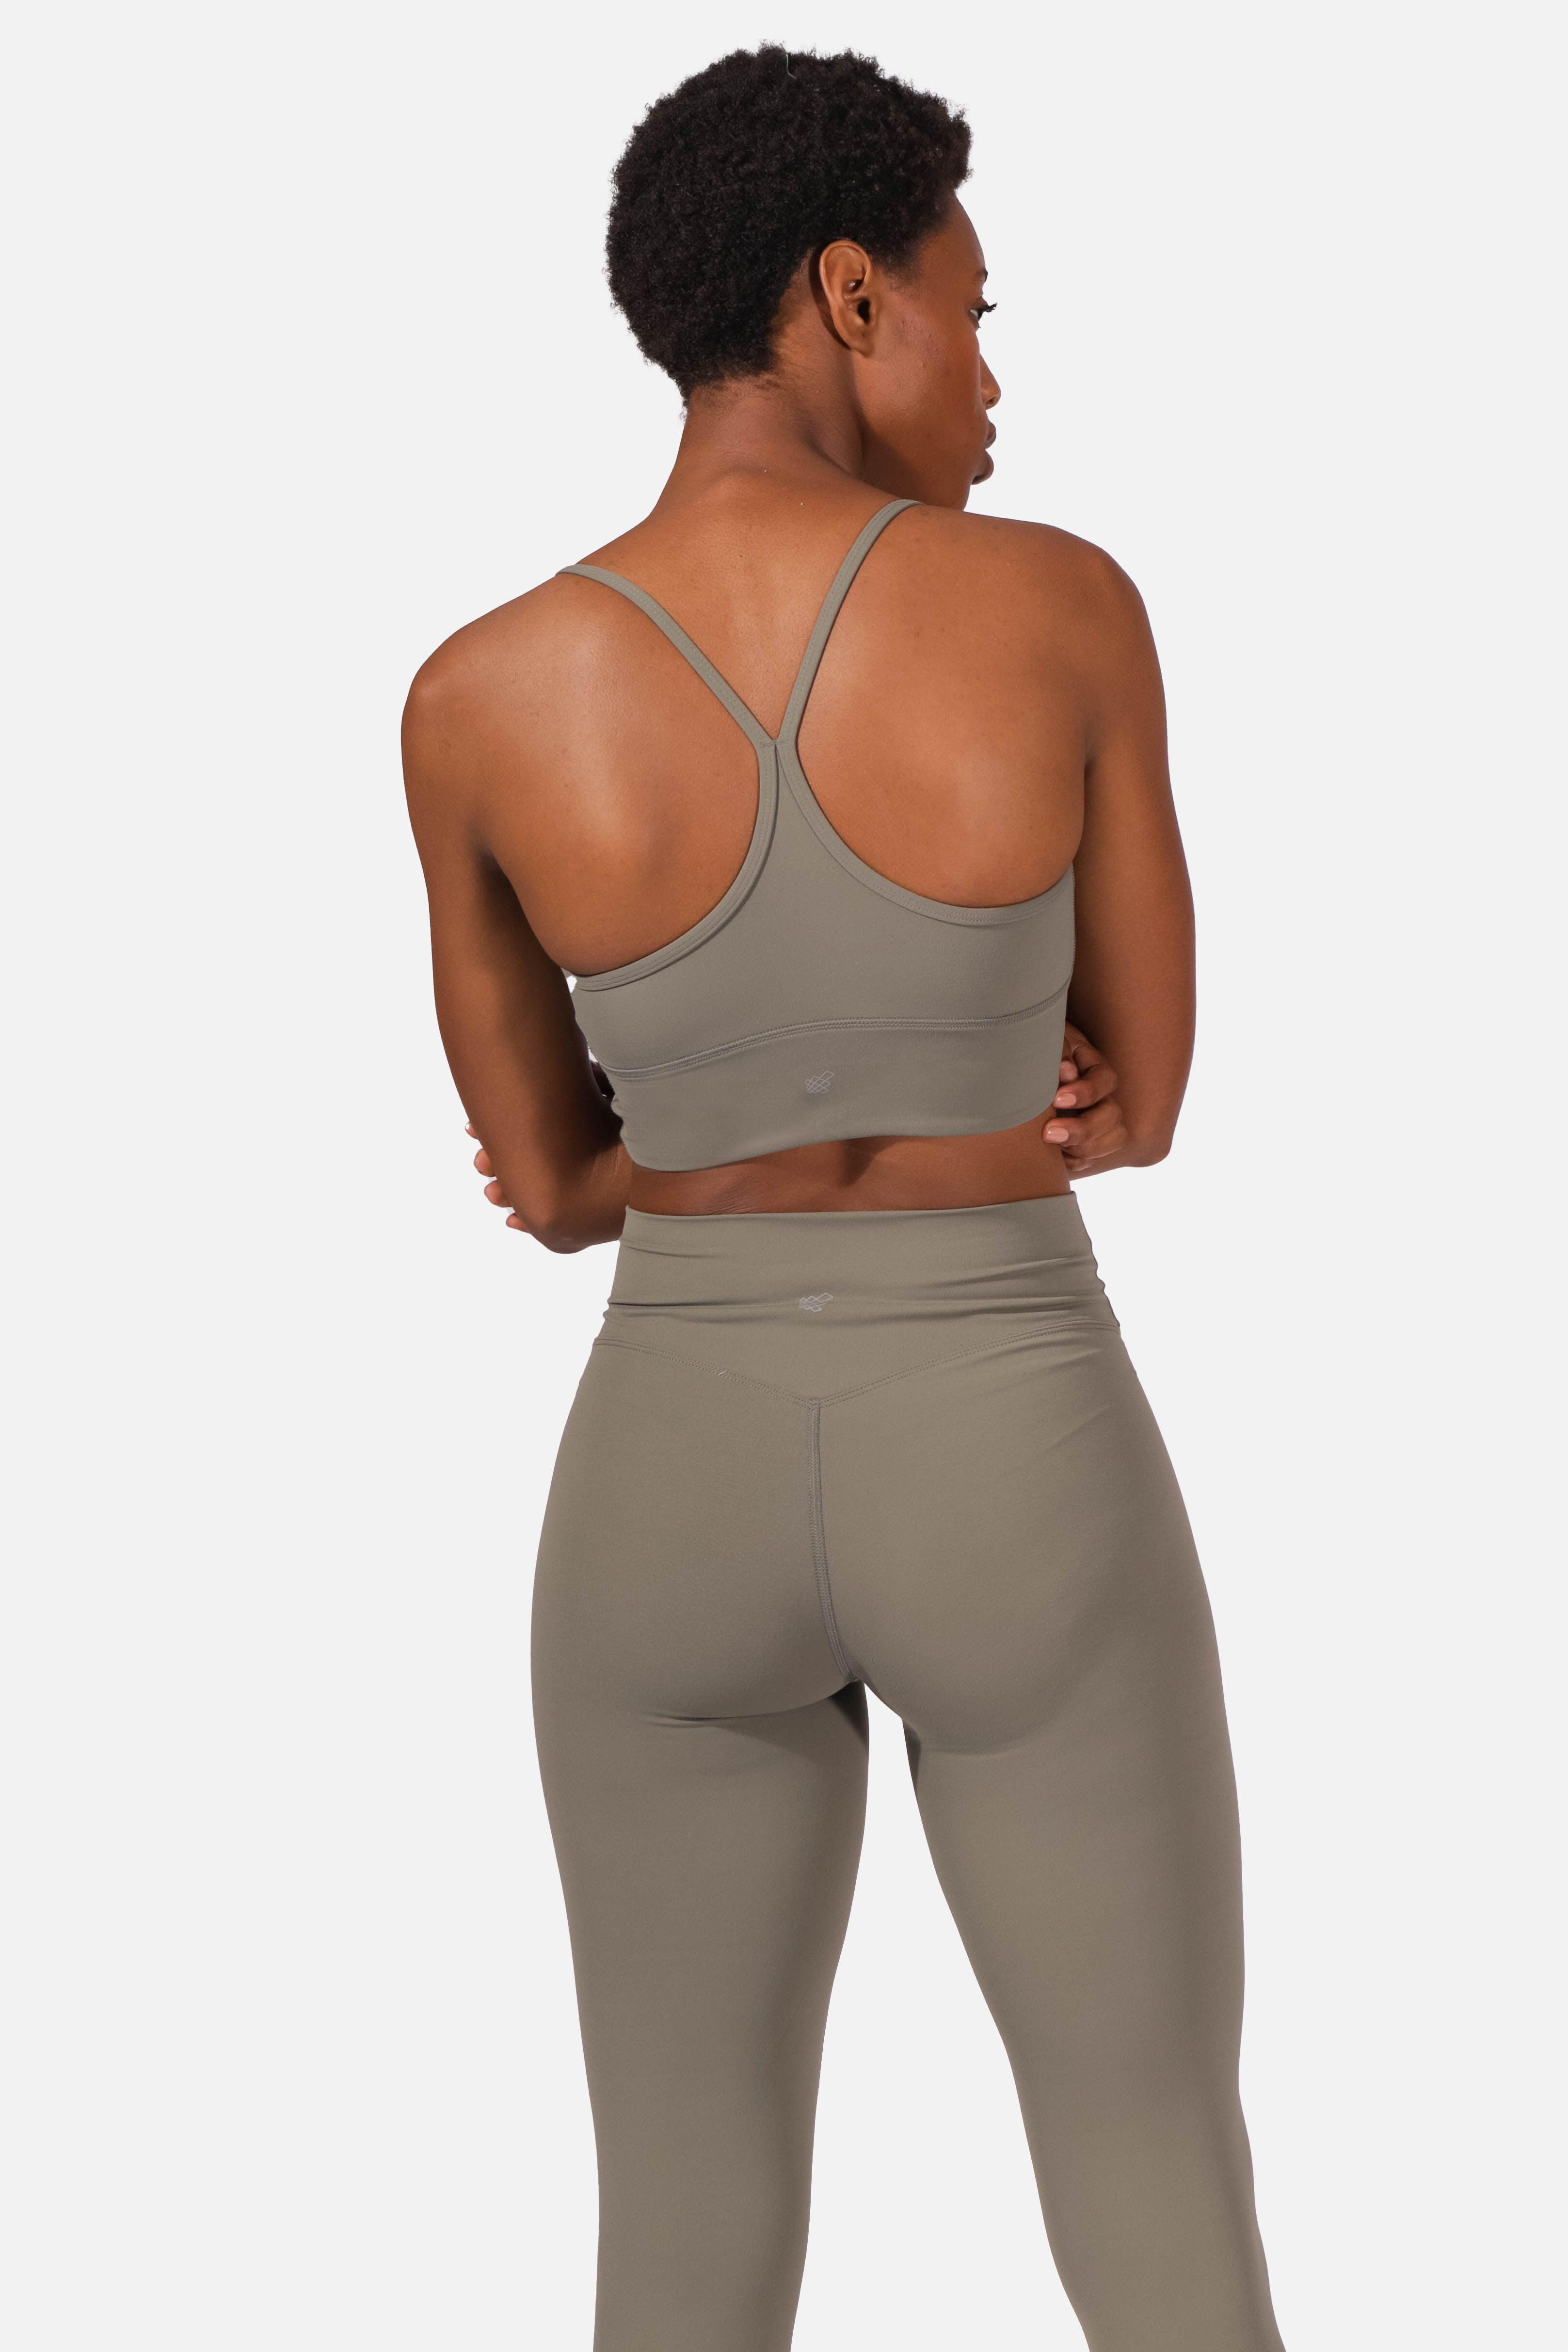 Extra 25% Off for Members: 100s of Styles Added Green Basketball Sports Bras.